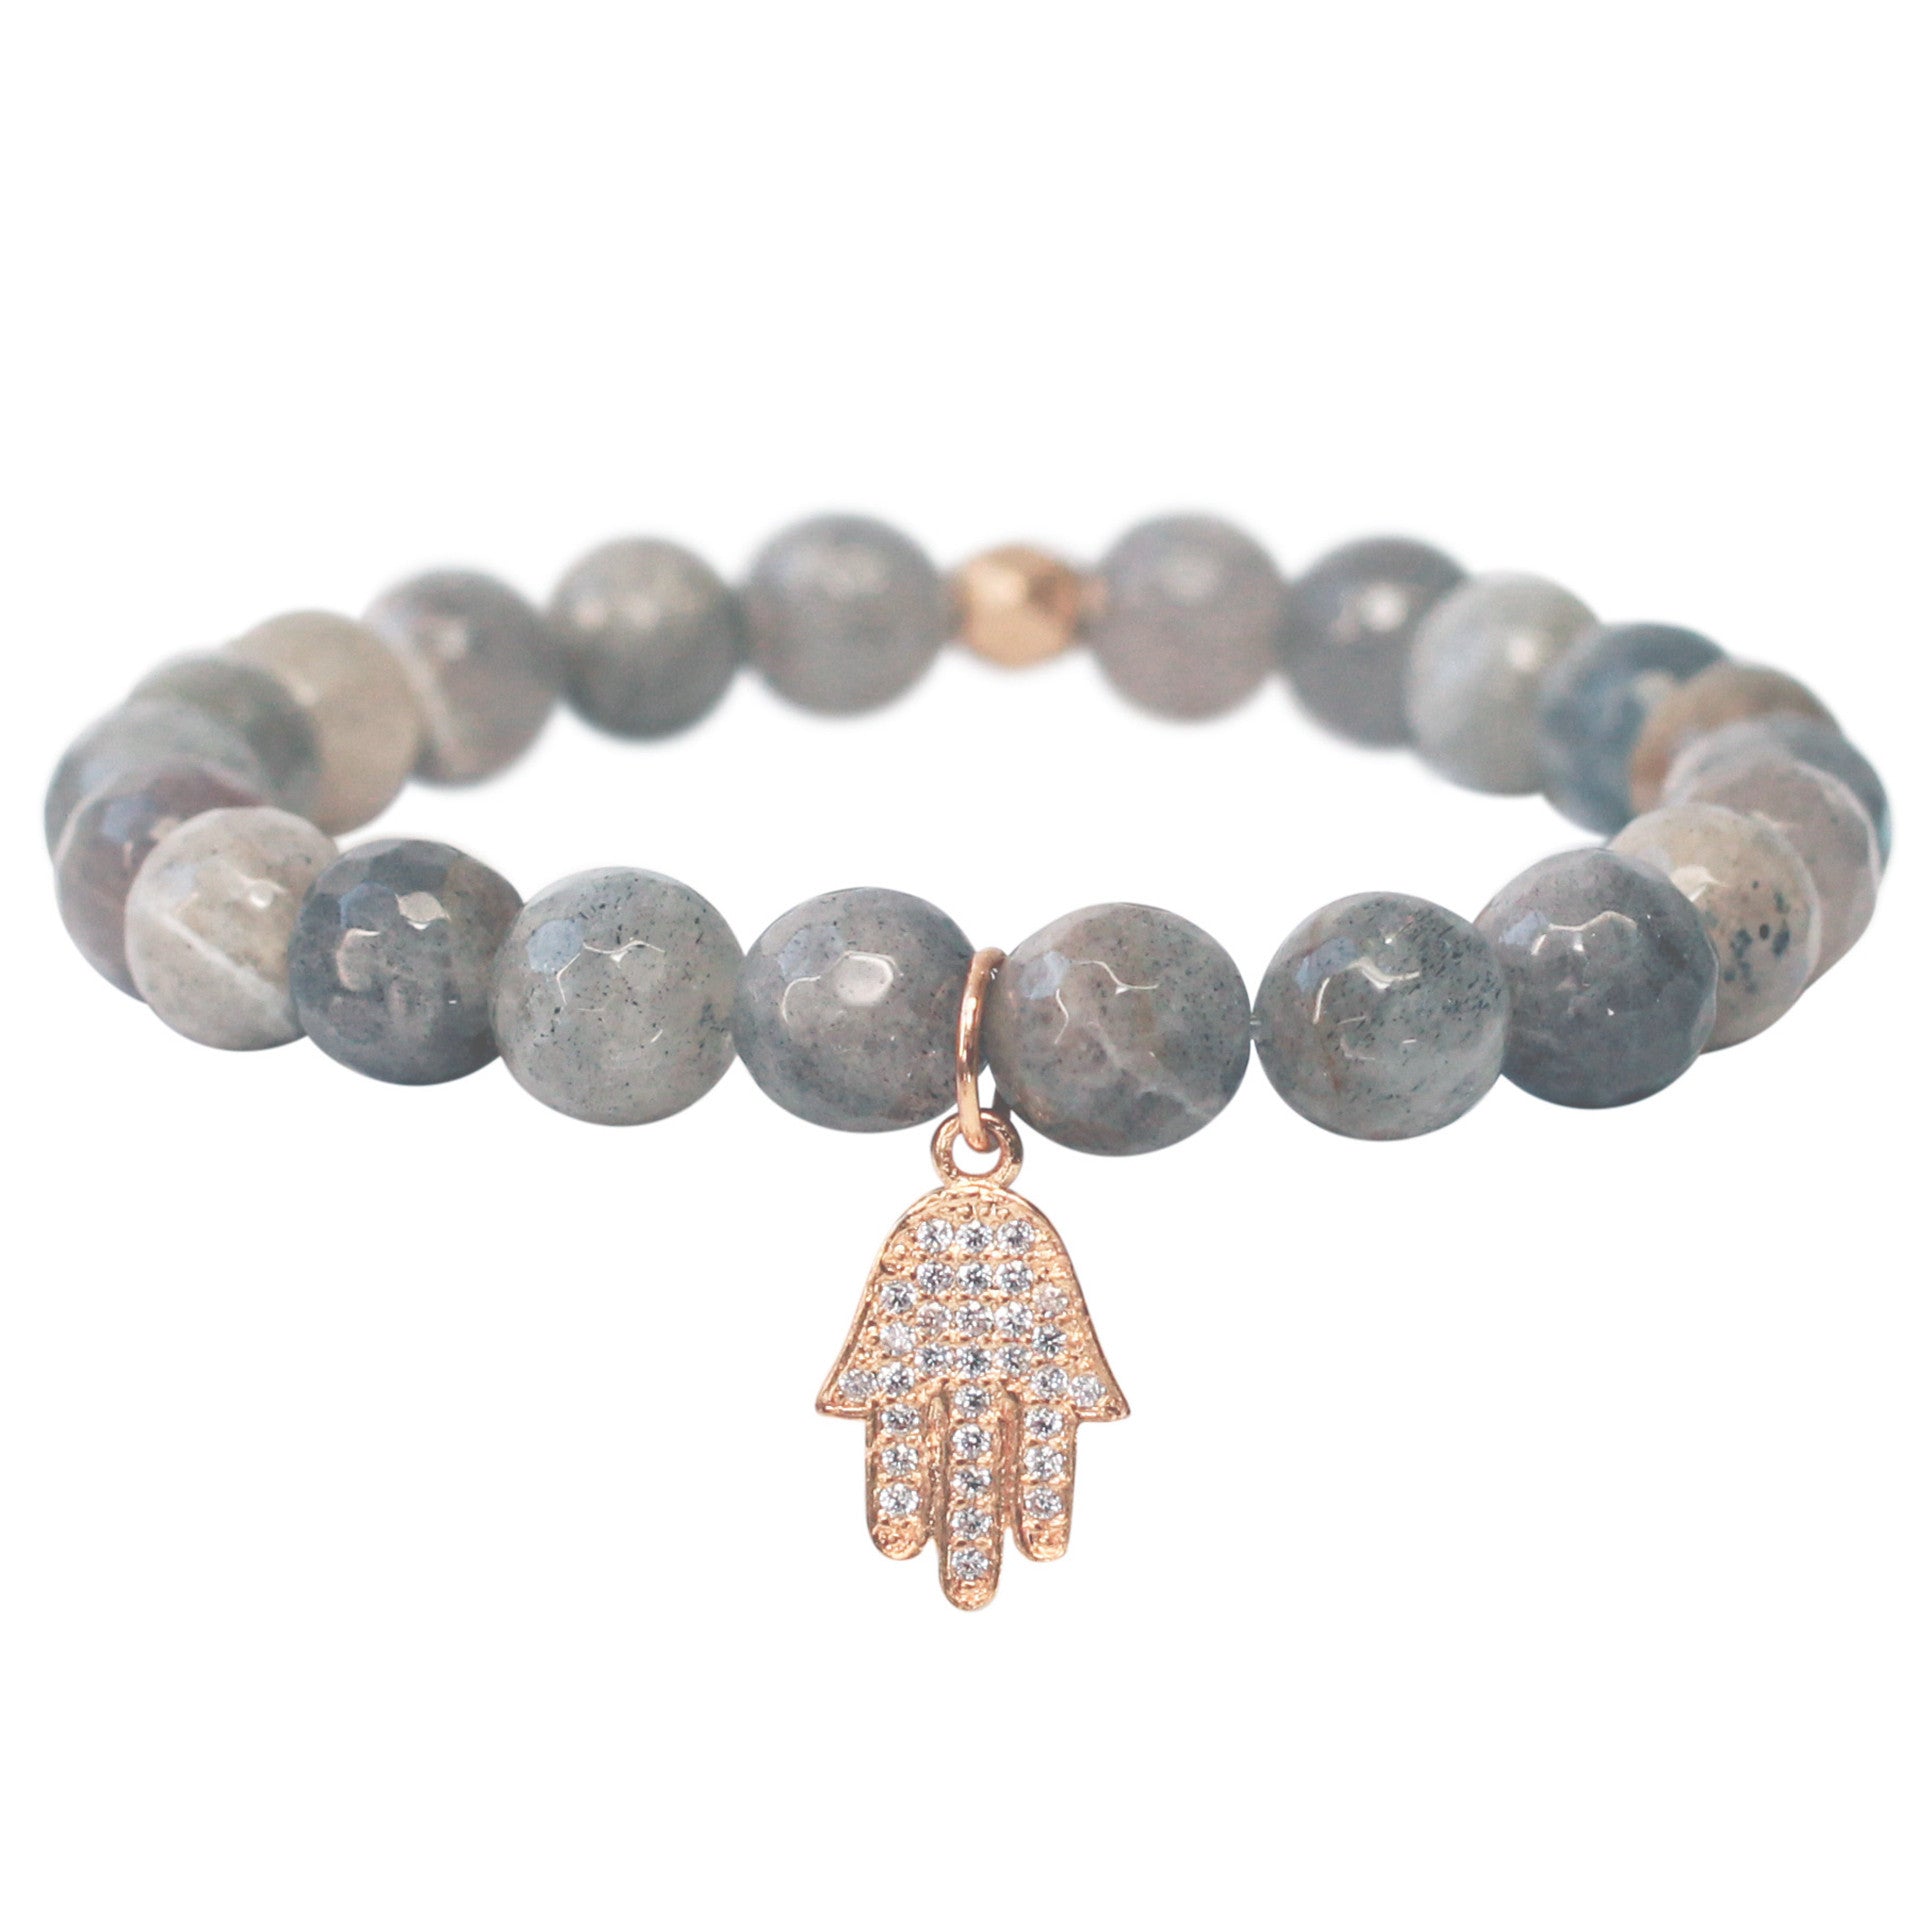 The Hamsa Charm in Pale Grey Bead with Gold